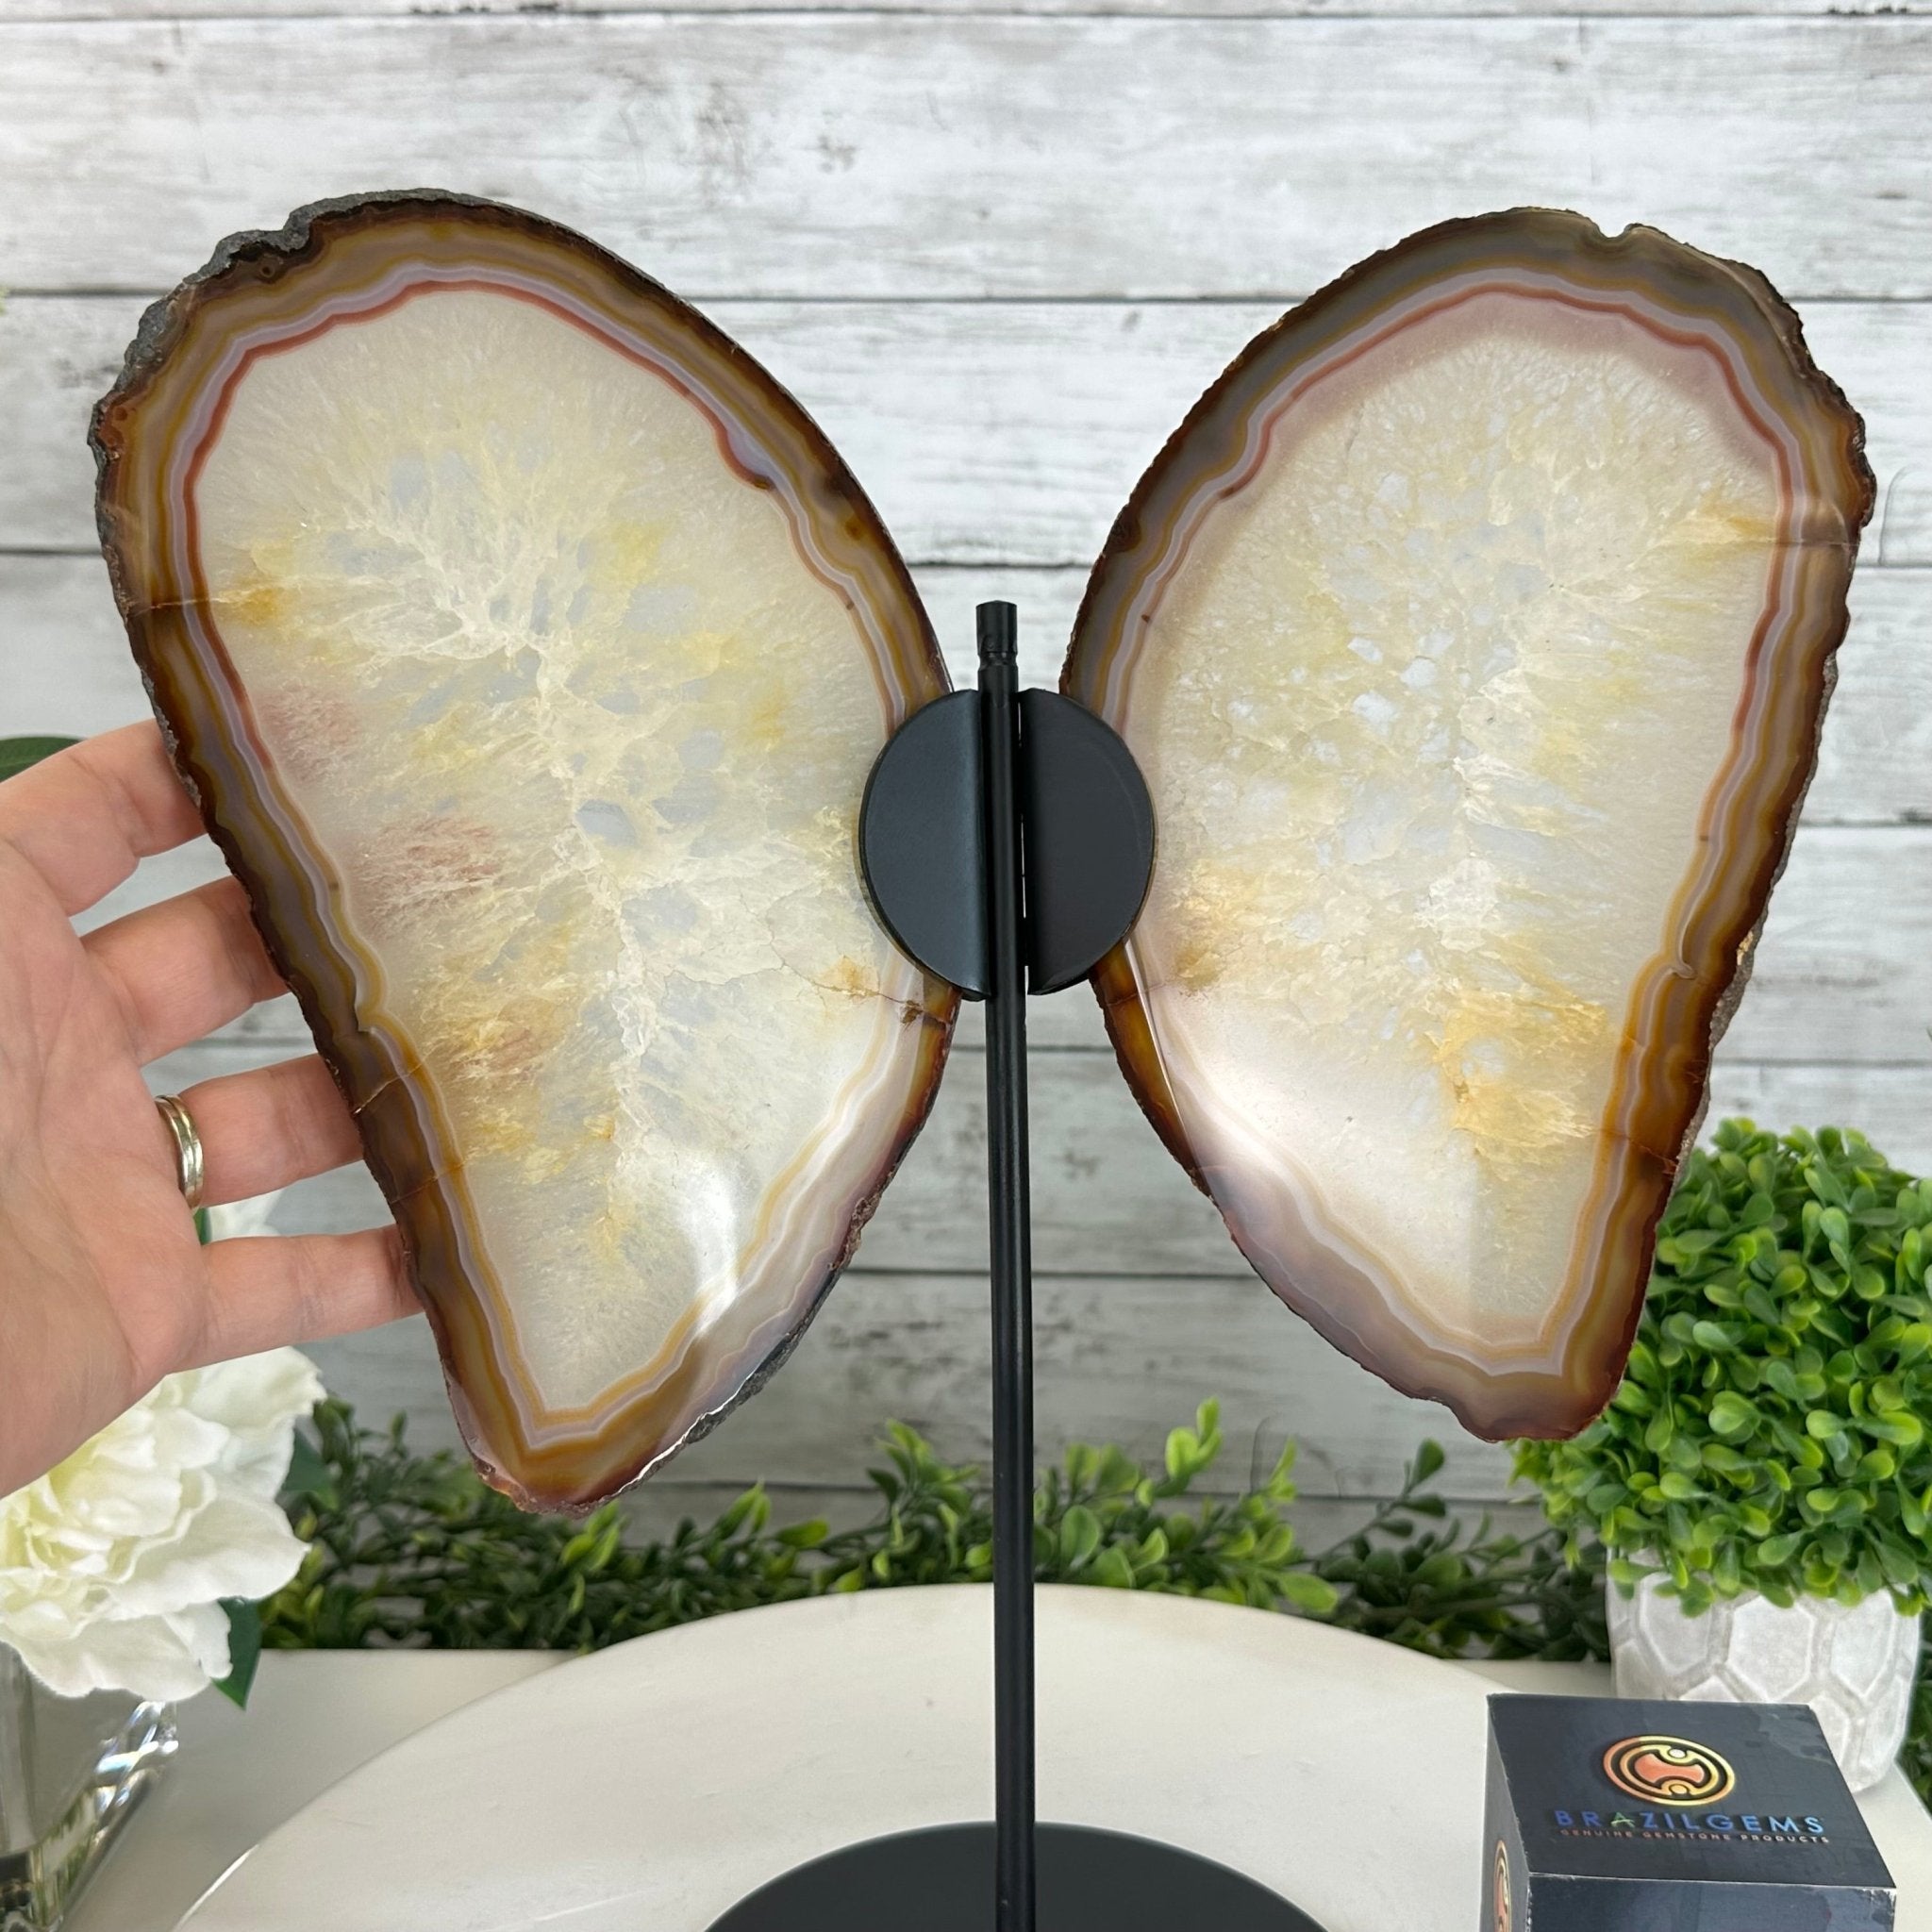 Natural Brazilian Agate "Butterfly Wings", 14.2" Tall #5050NA-080 - Brazil GemsBrazil GemsNatural Brazilian Agate "Butterfly Wings", 14.2" Tall #5050NA-080Agate Butterfly Wings5050NA-080